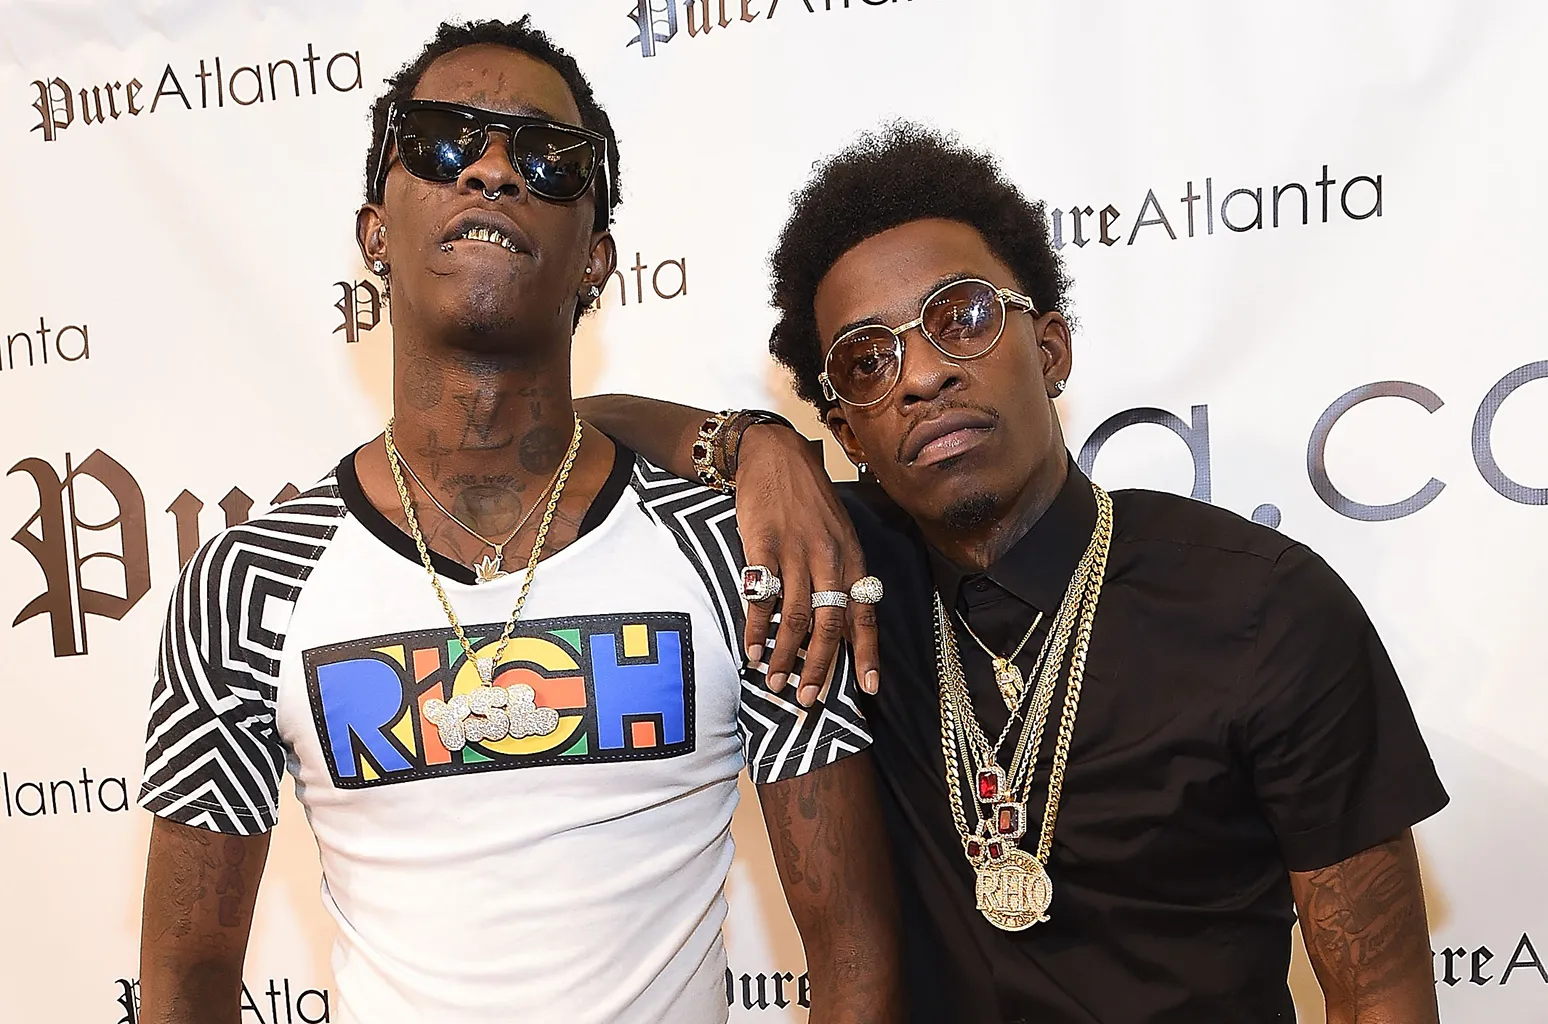 Rich Homie Quan Denies Snitching on Young Thug, Offers $1 Million Reward for Proof [Video]